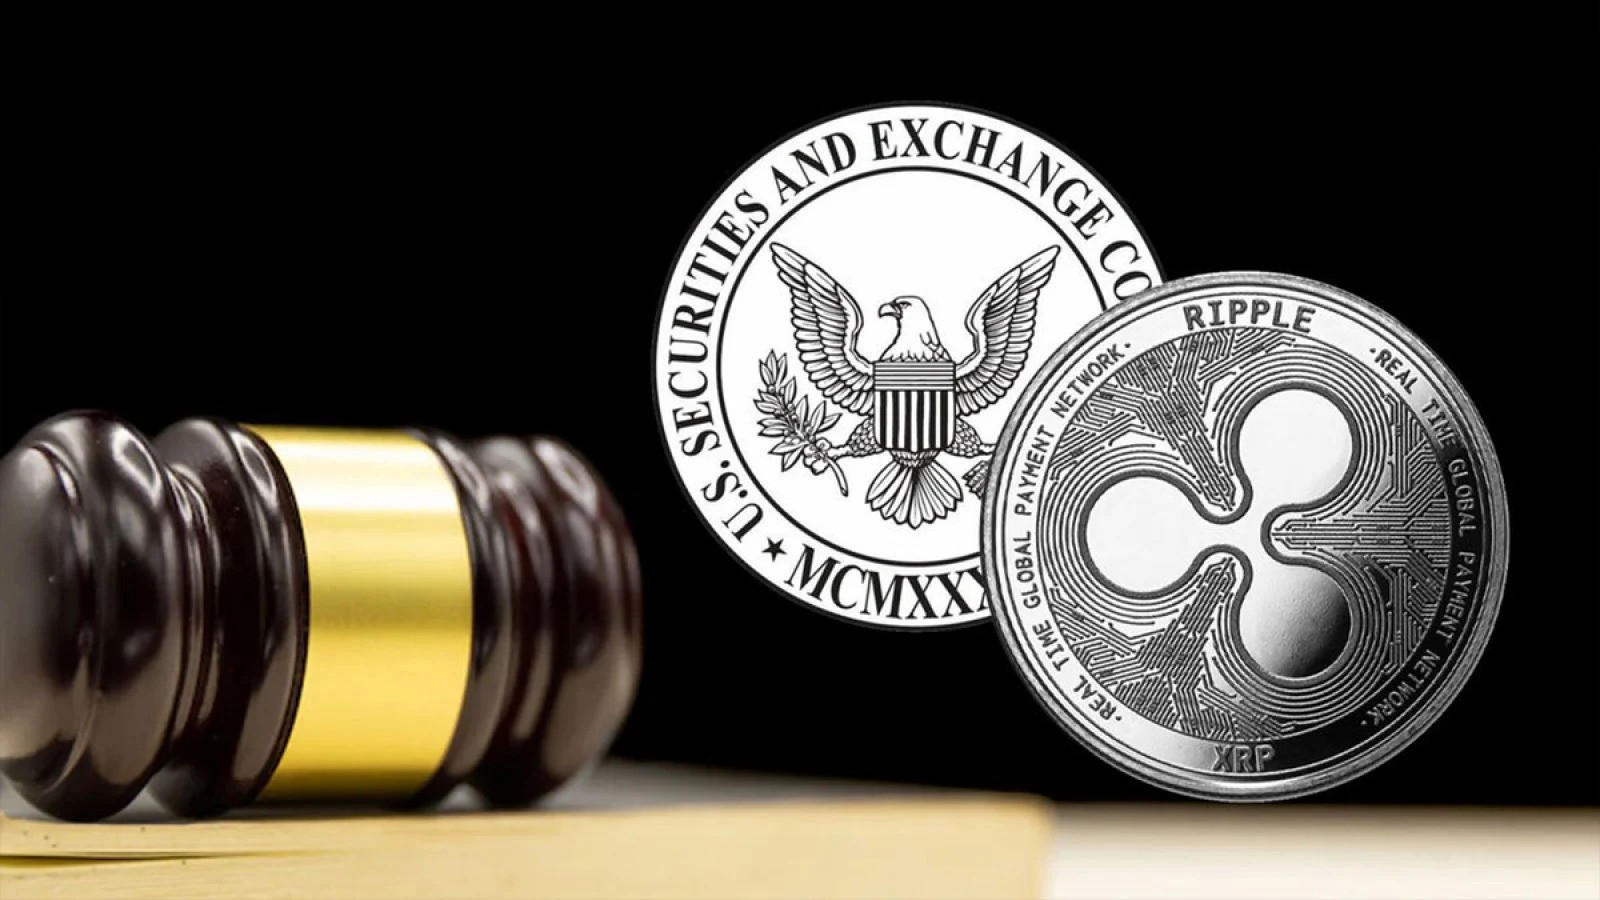 Layton Opposes SEC’s Motion to Seal Hinman’s Documents: Ripple vs SEC